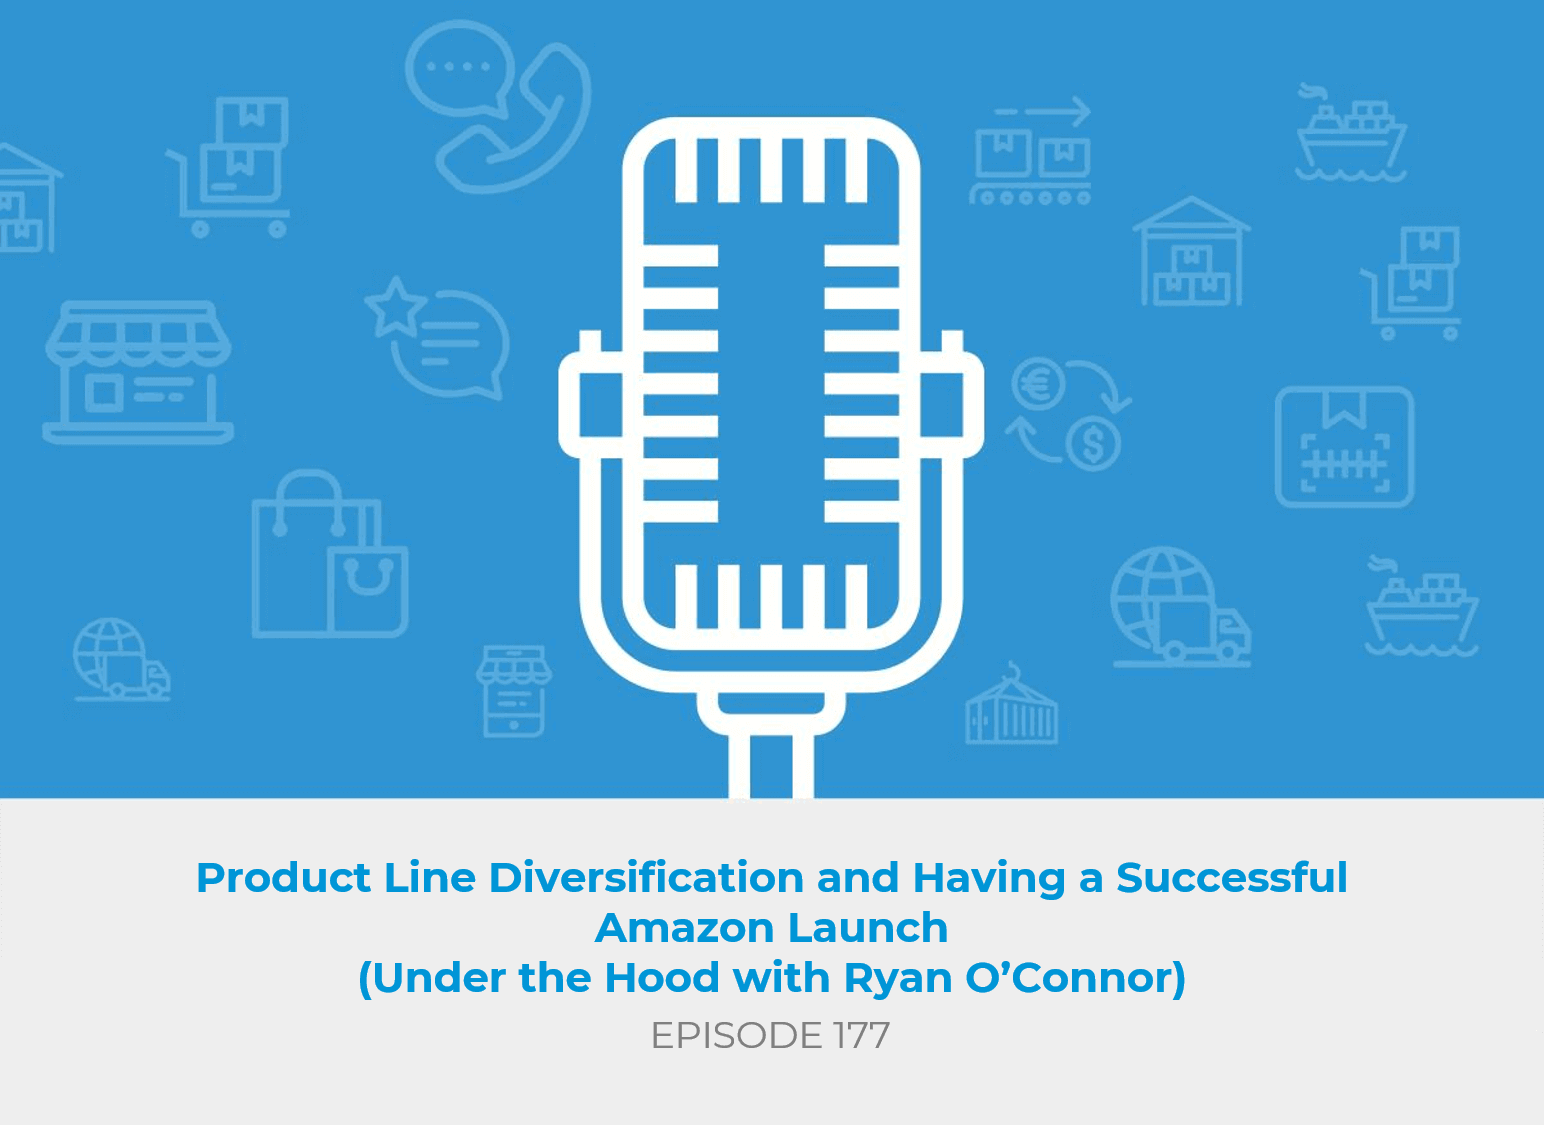 Product Line Diversification and Having a Successful Amazon Launch (Under the Hood with Ryan O’Connor)